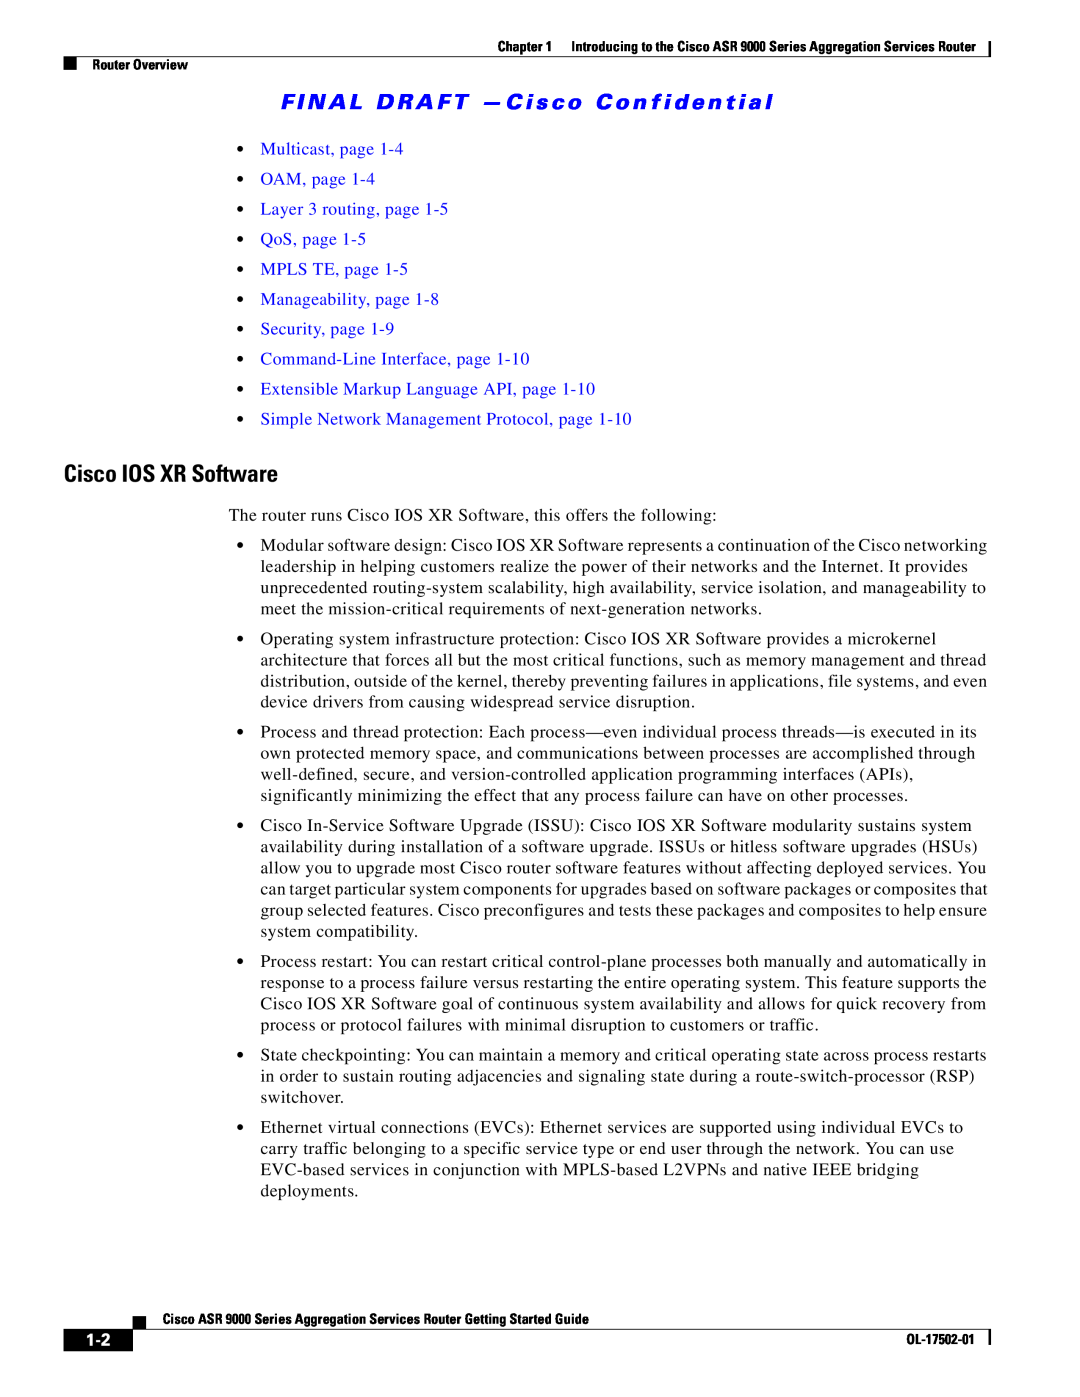 Cisco Systems A9K24X10GETR, ASR 9000 manual Cisco IOS XR Software, Multicast, page OAM, page Layer 3 routing, page QoS, page 